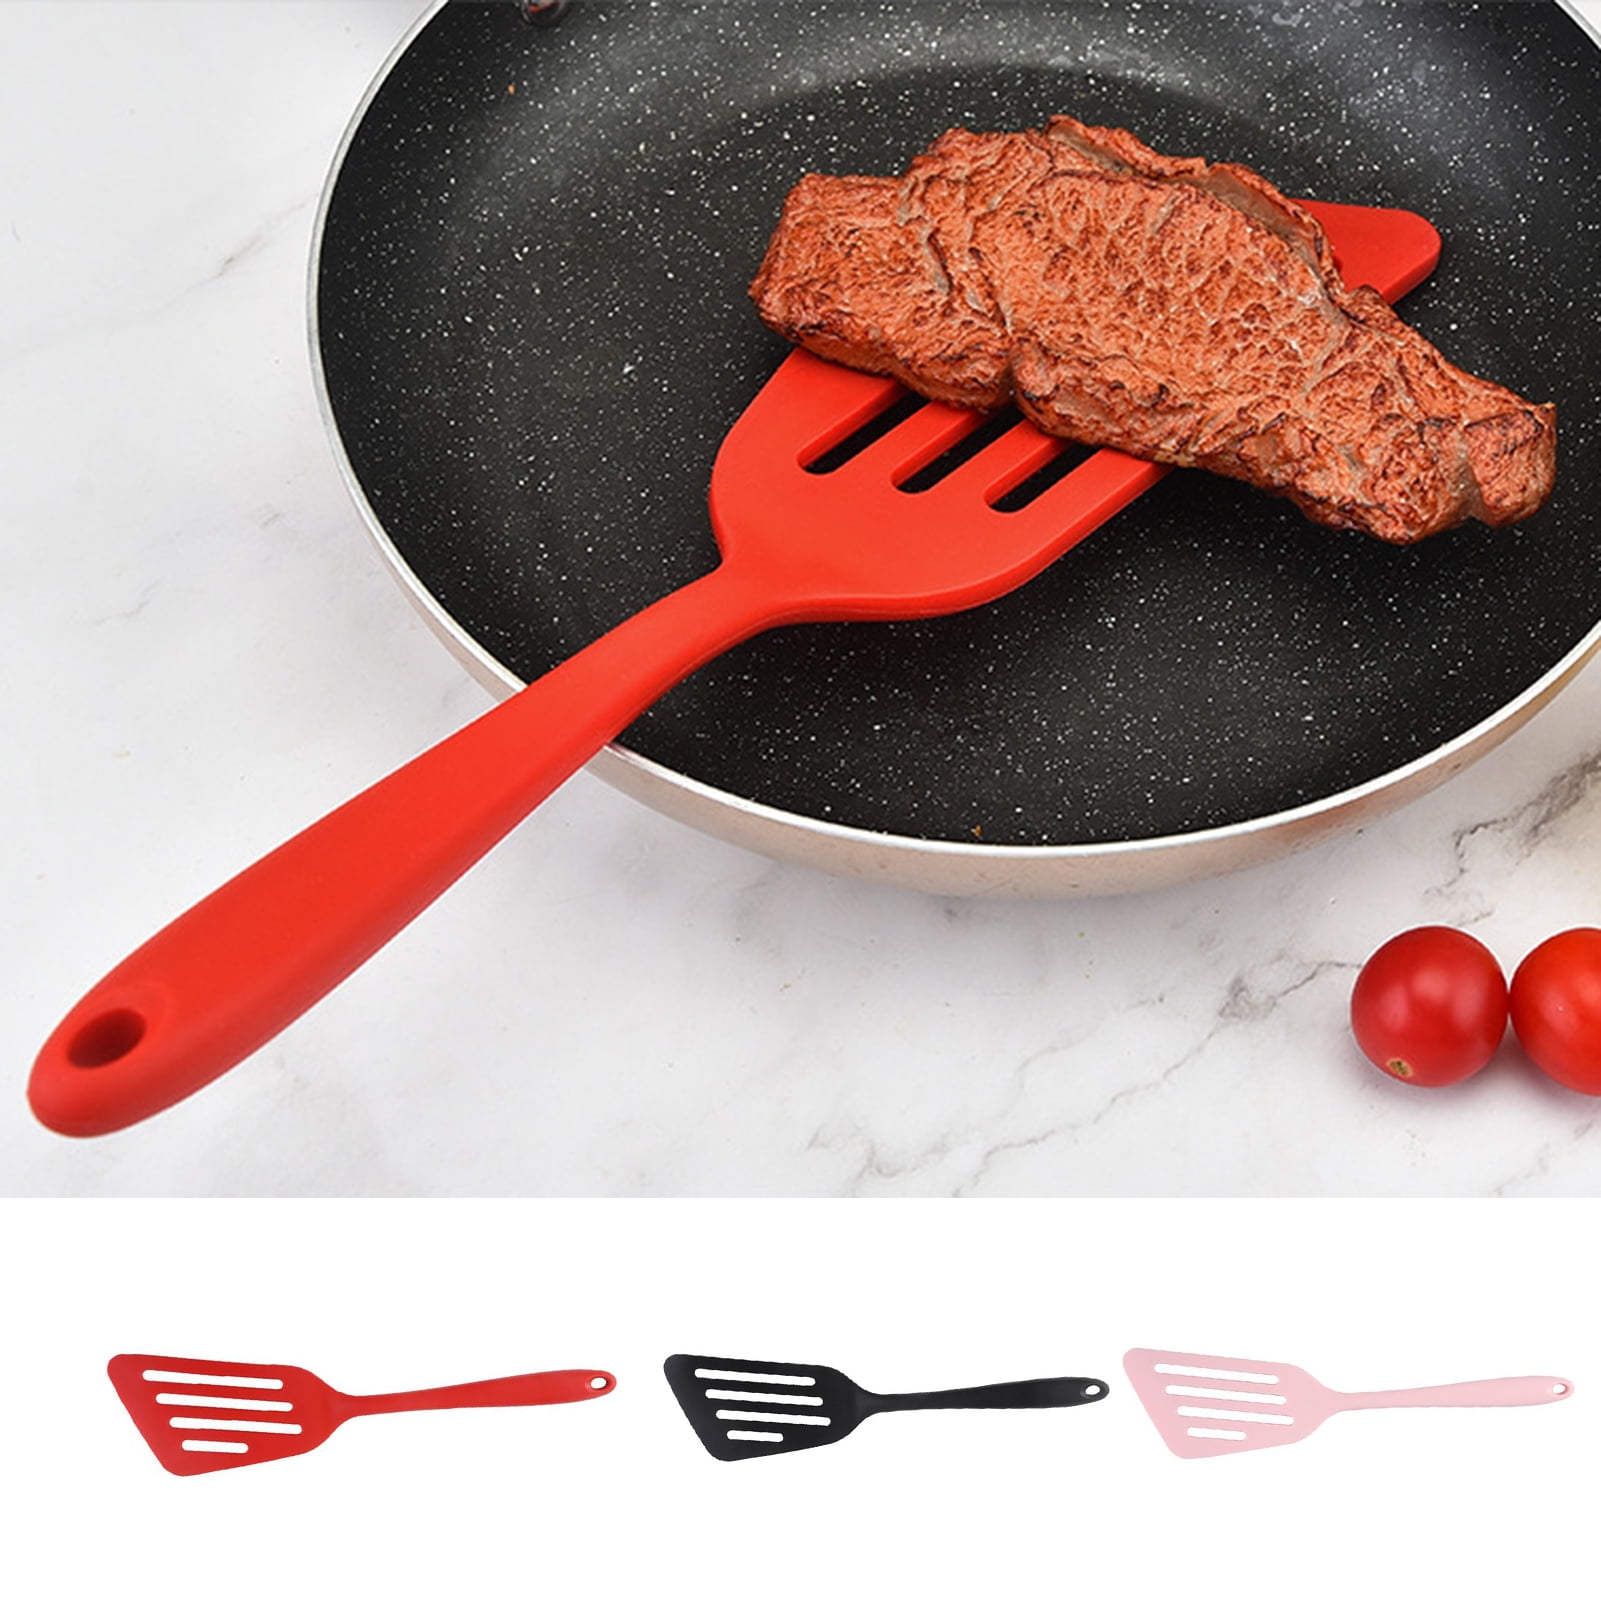 The Kosher Cook Meat Red Silicone Spatula - Shop Utensils